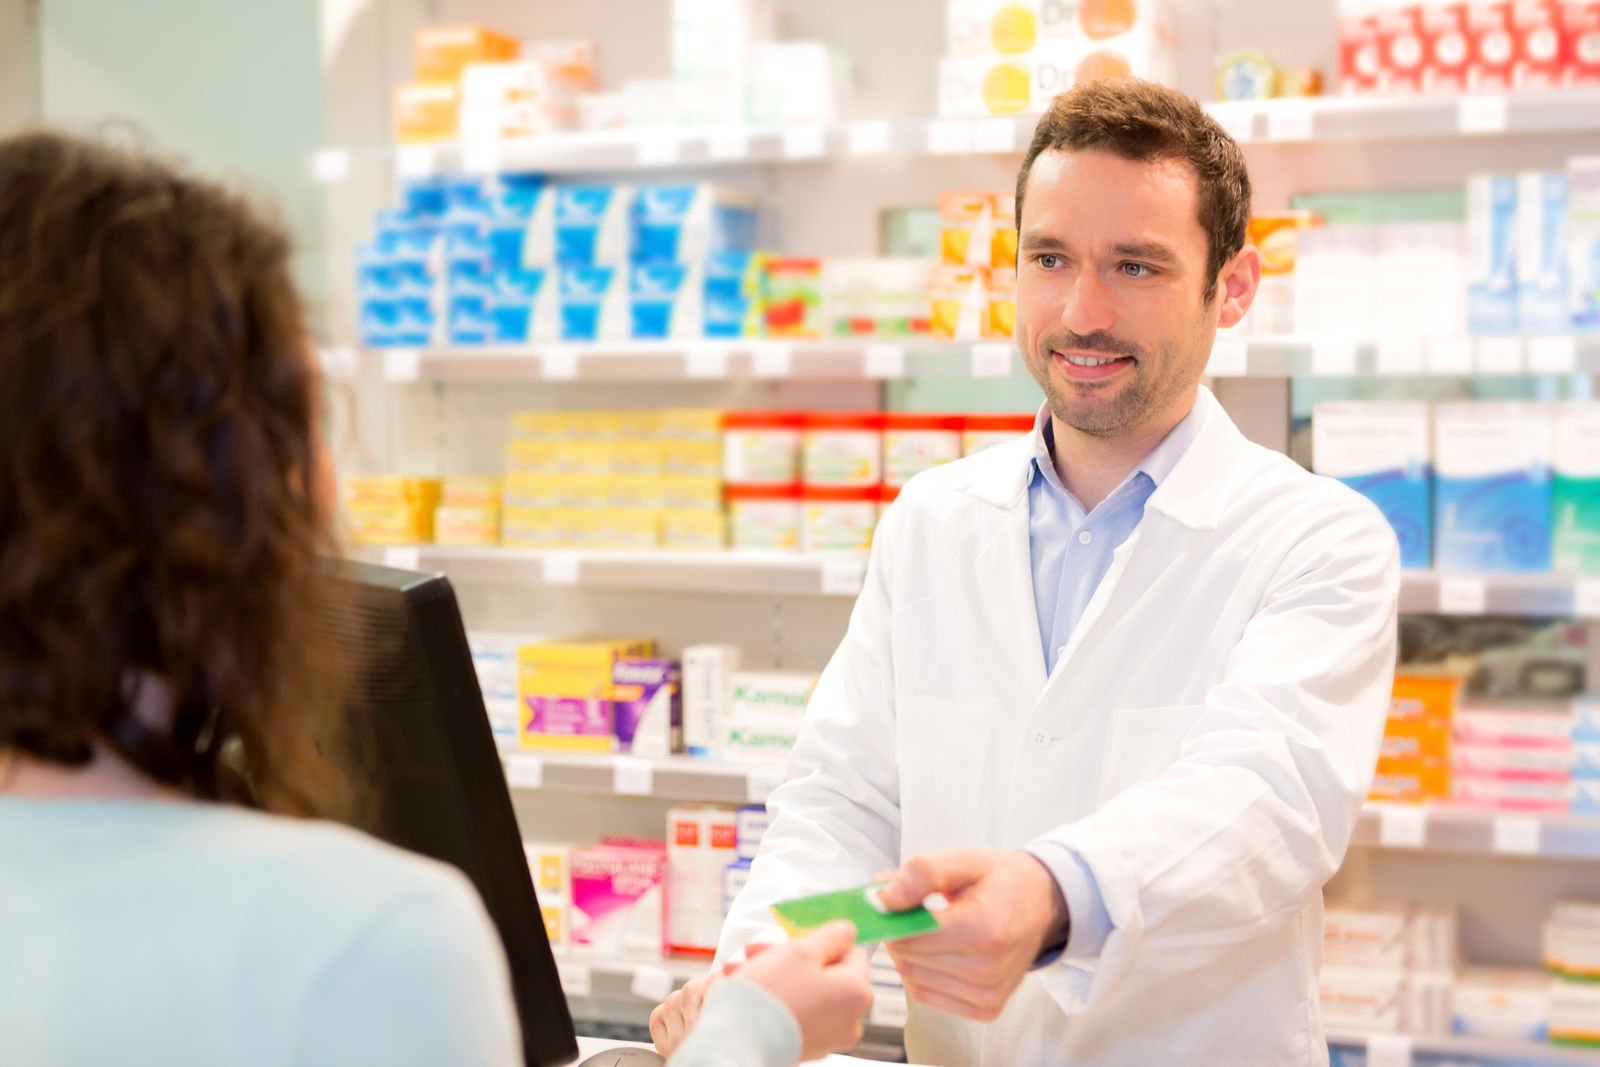 Car Insurance for Pharmacists